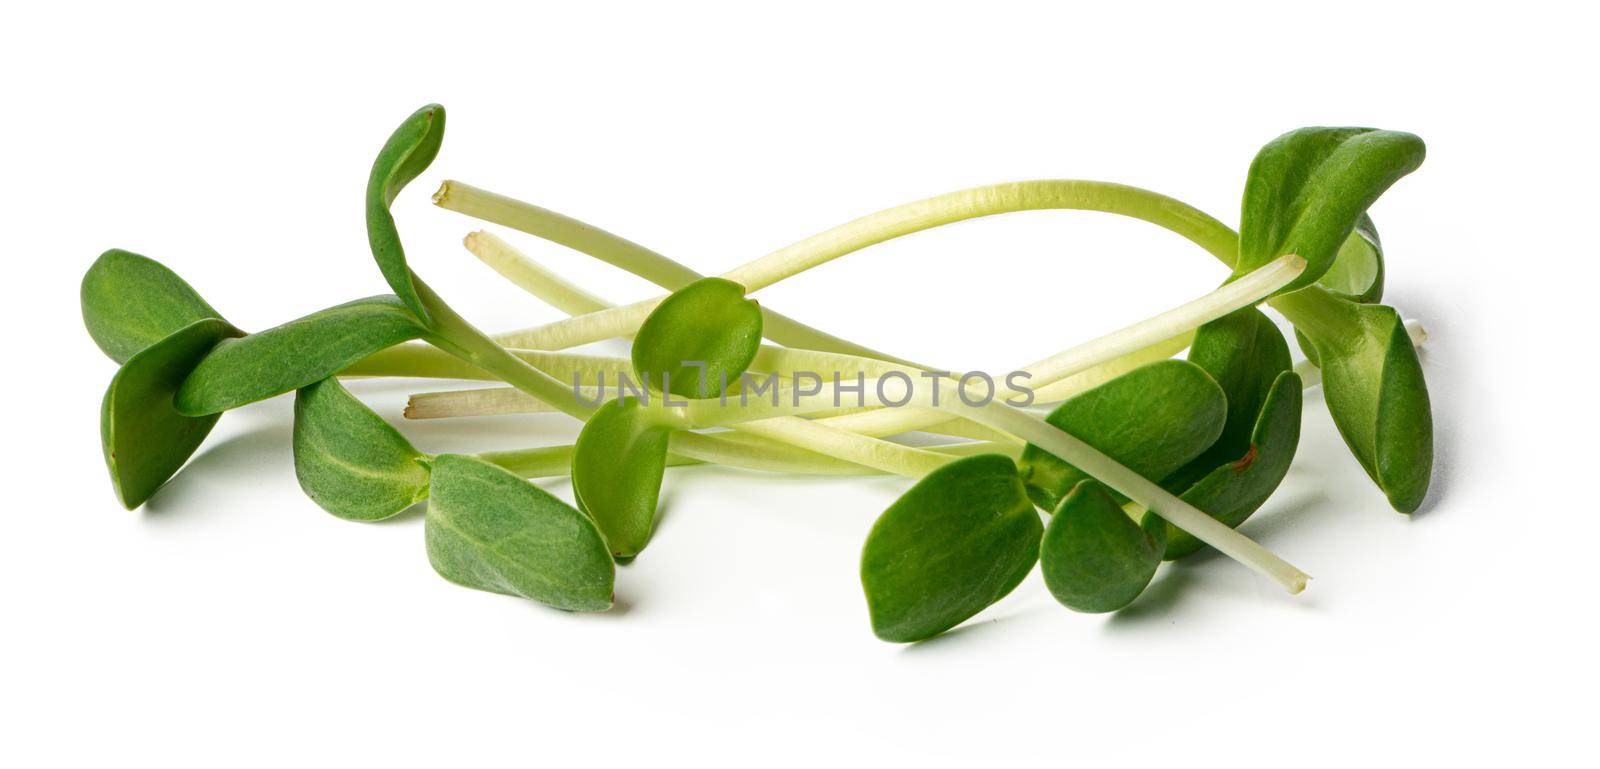 Bunch of micro green sprouts isolated on white background by Fabrikasimf